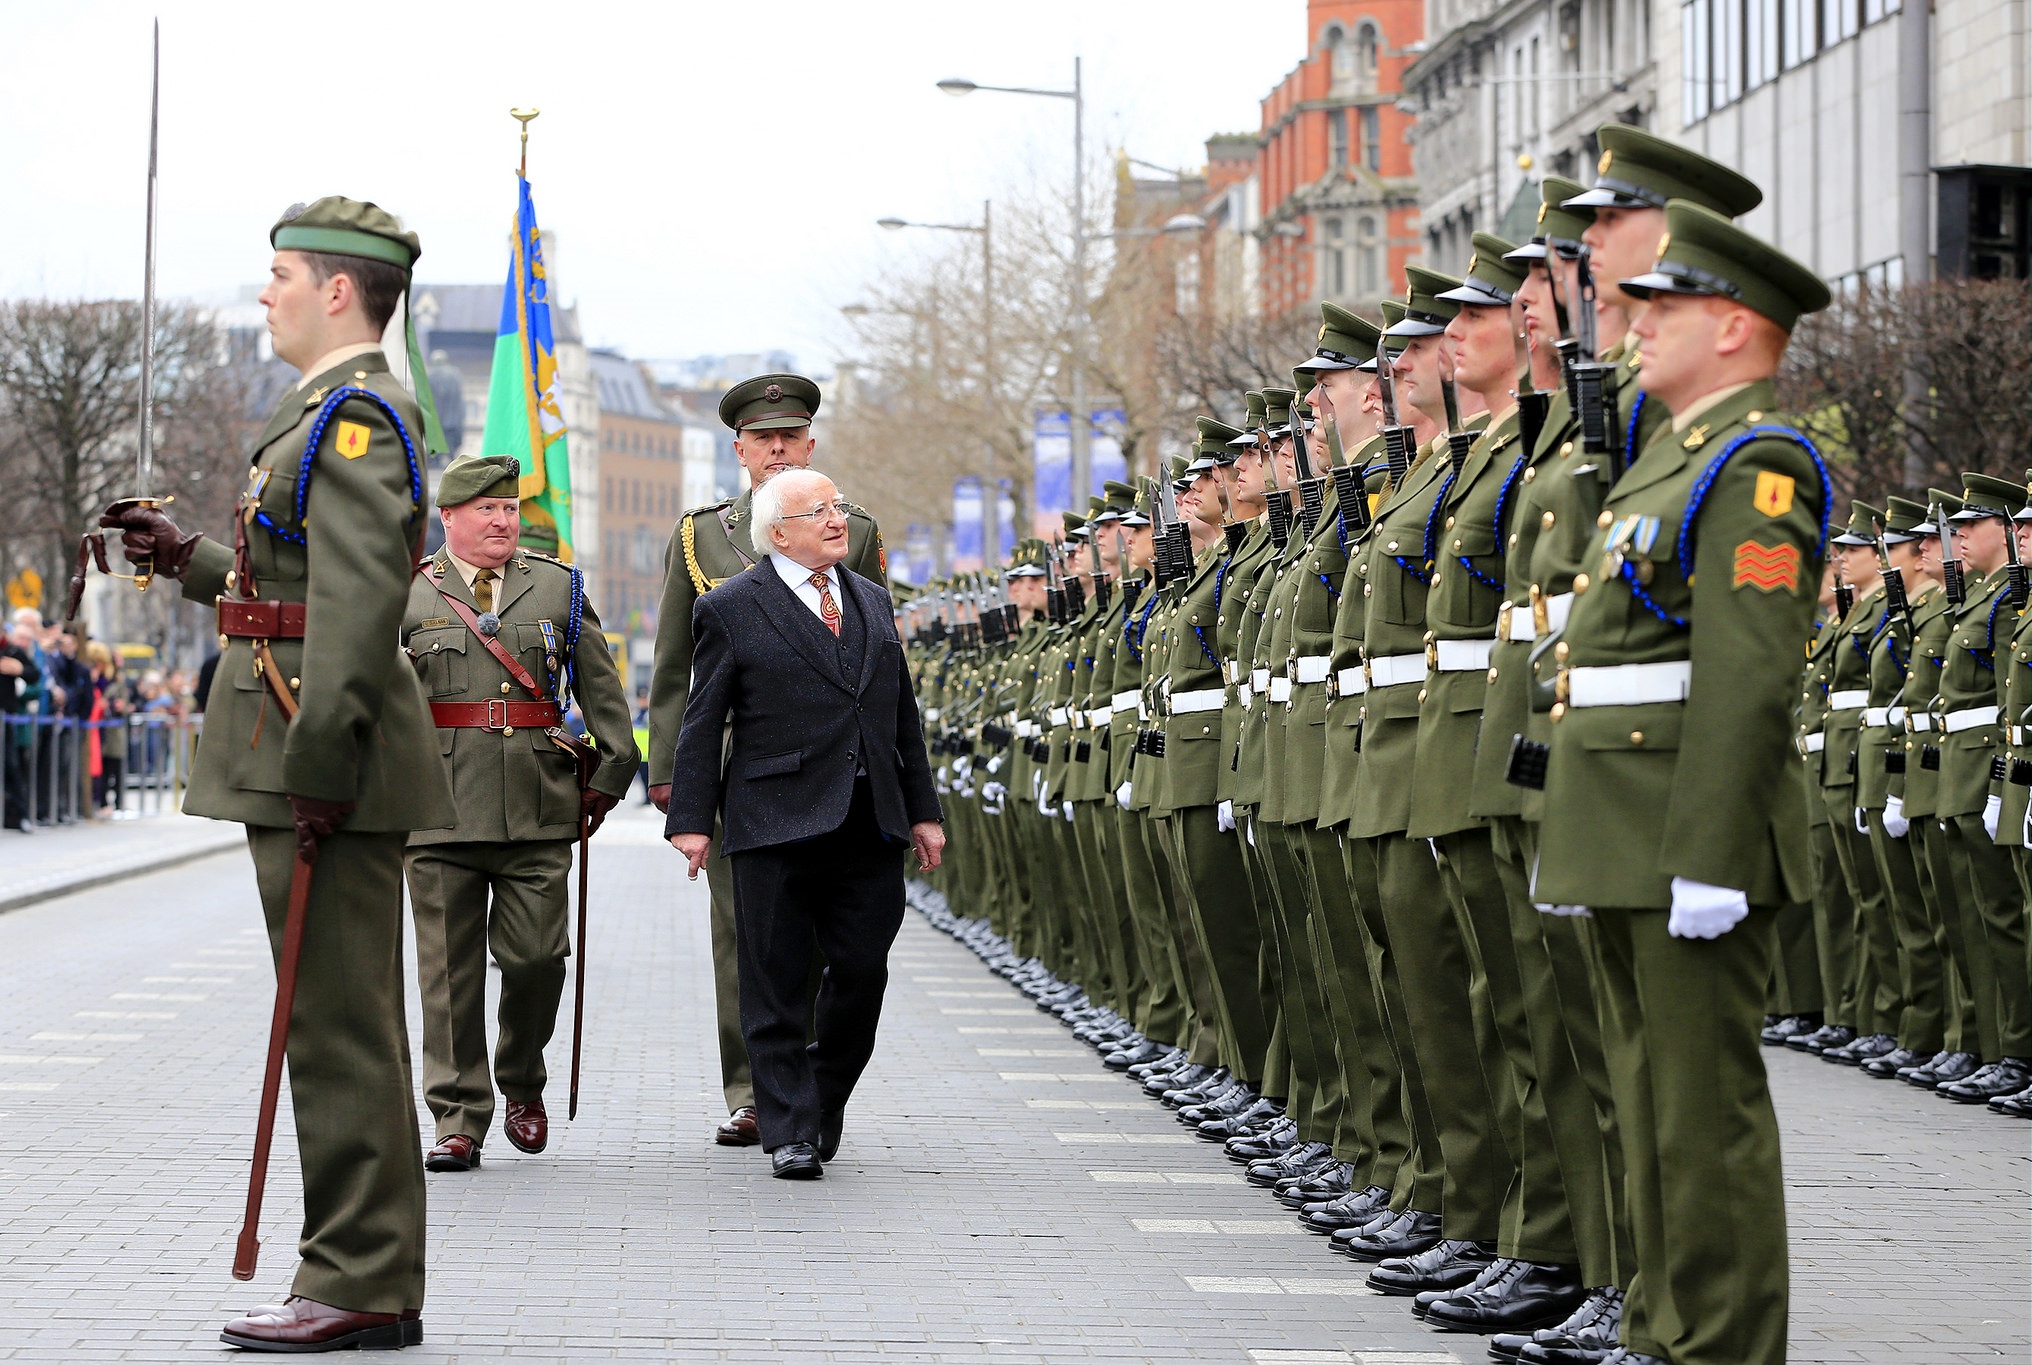 A Terrible Beauty: Remembering Ireland’s 1916 Easter Rebellion